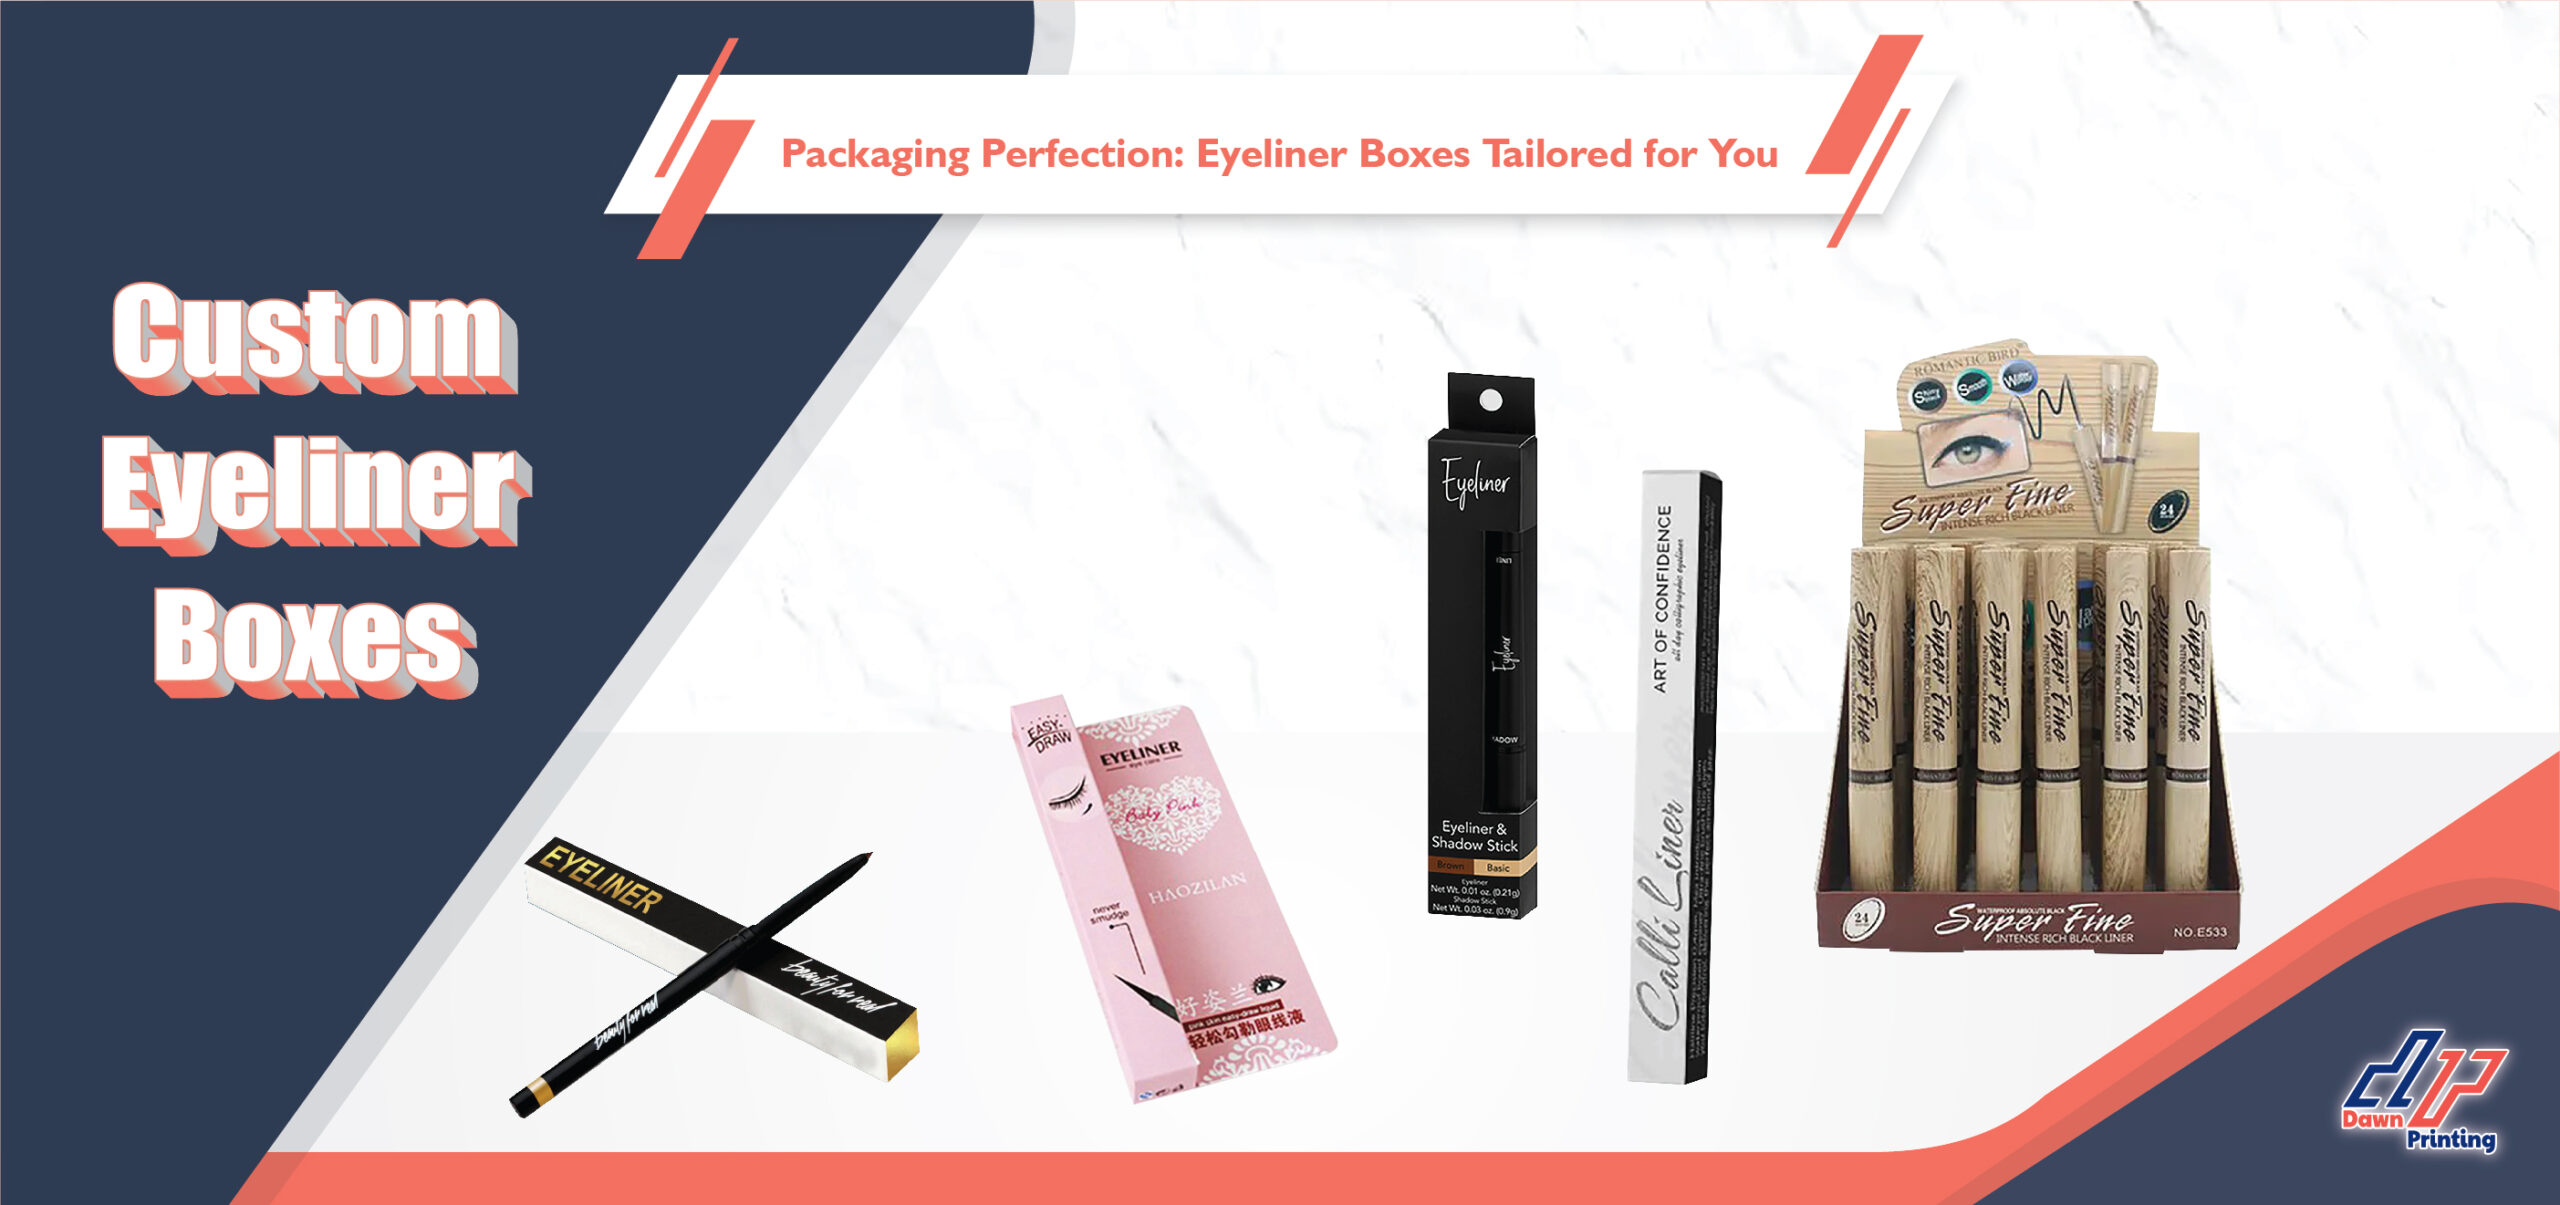 Packaging Perfection: Eyeliner Boxes Tailored for You-Dawn Printing